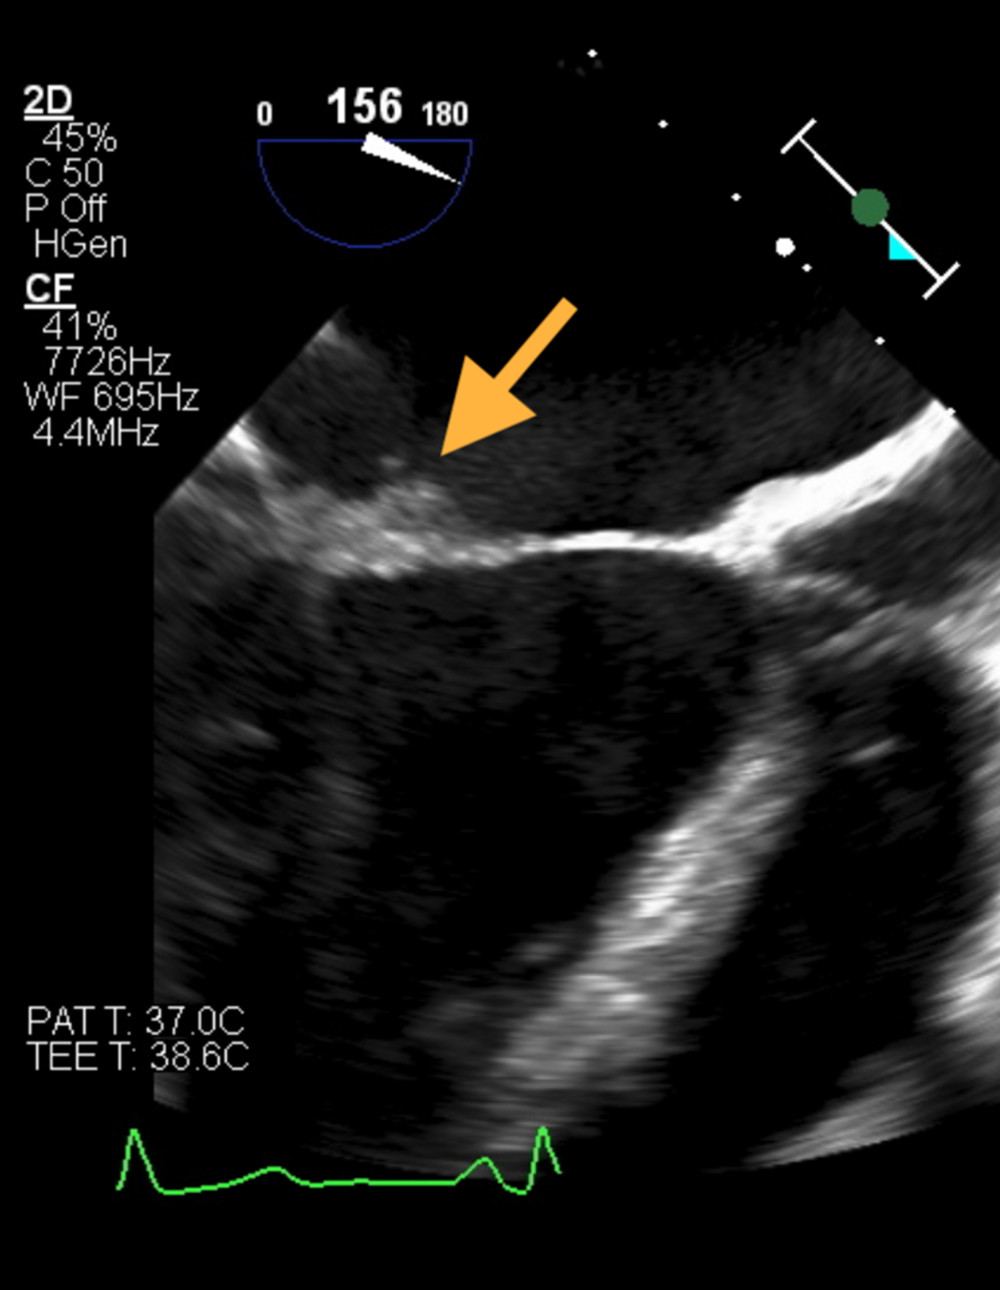 Transesophageal echocardiography. There is a 4.6×3.1 mm verruca on the mitral valve that is lumped with the valve (arrow).